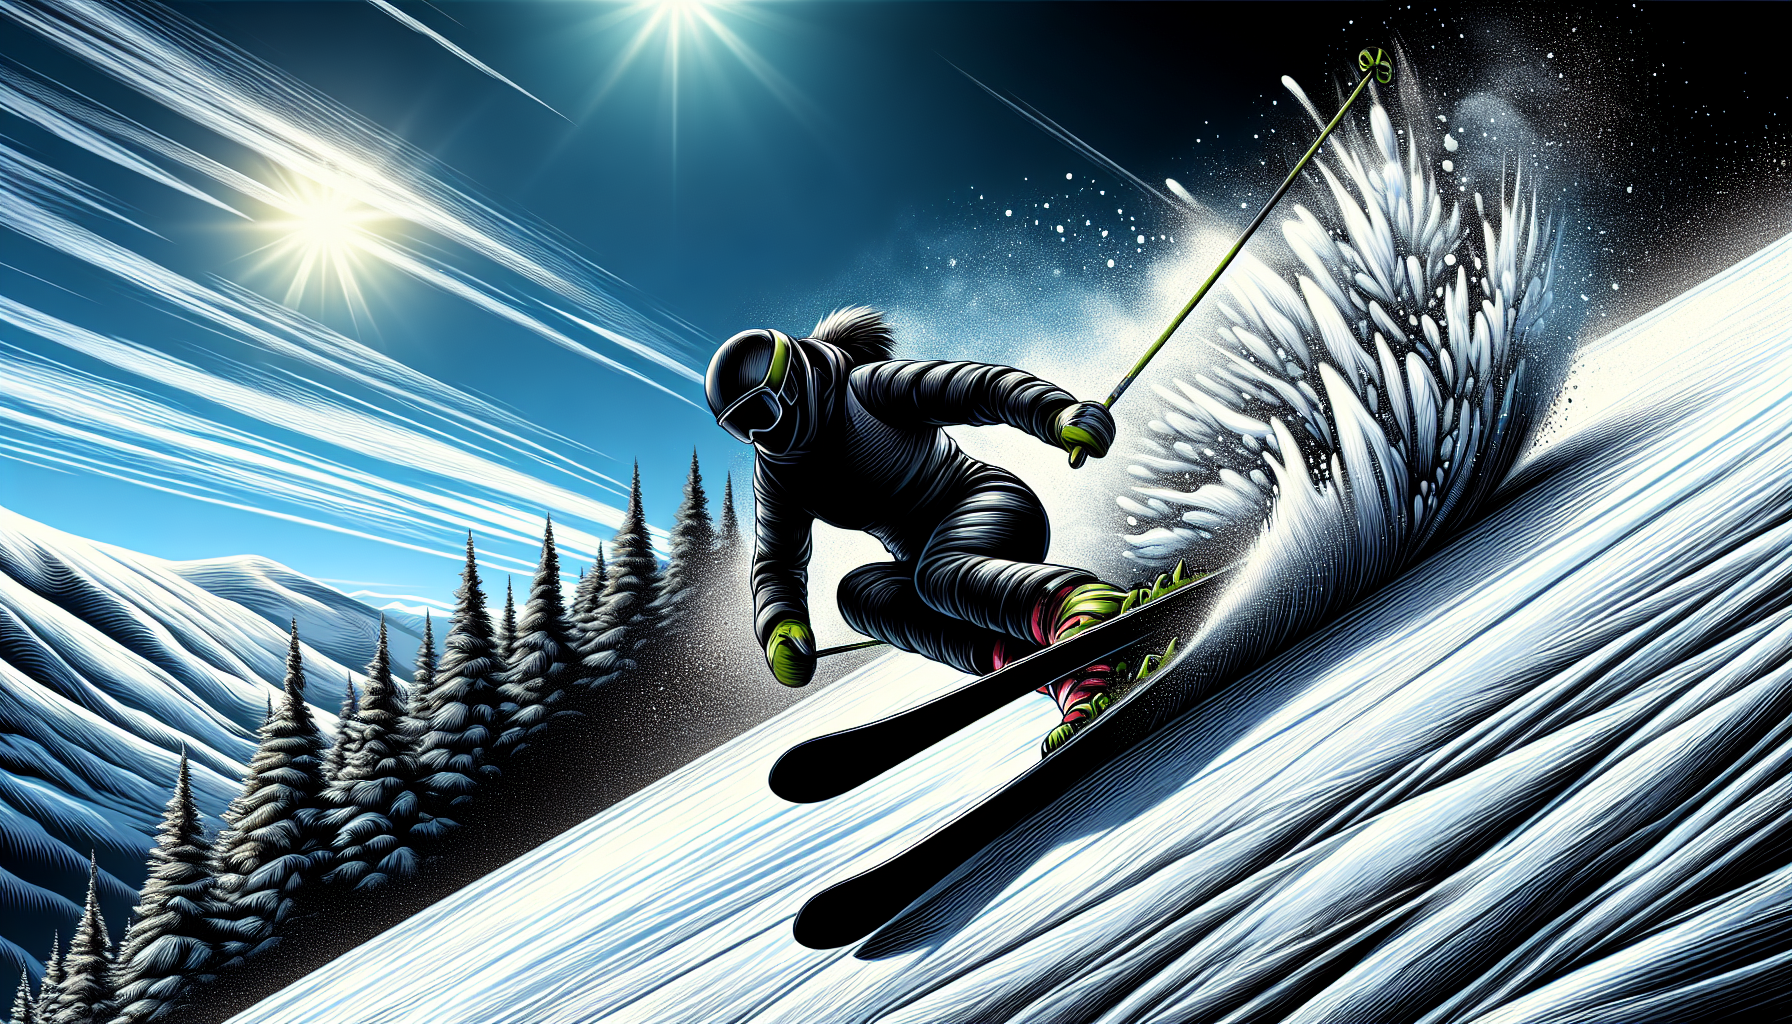 Mastering the Slopes: Understanding the Science of Skiing and the Physics of Carving Turns